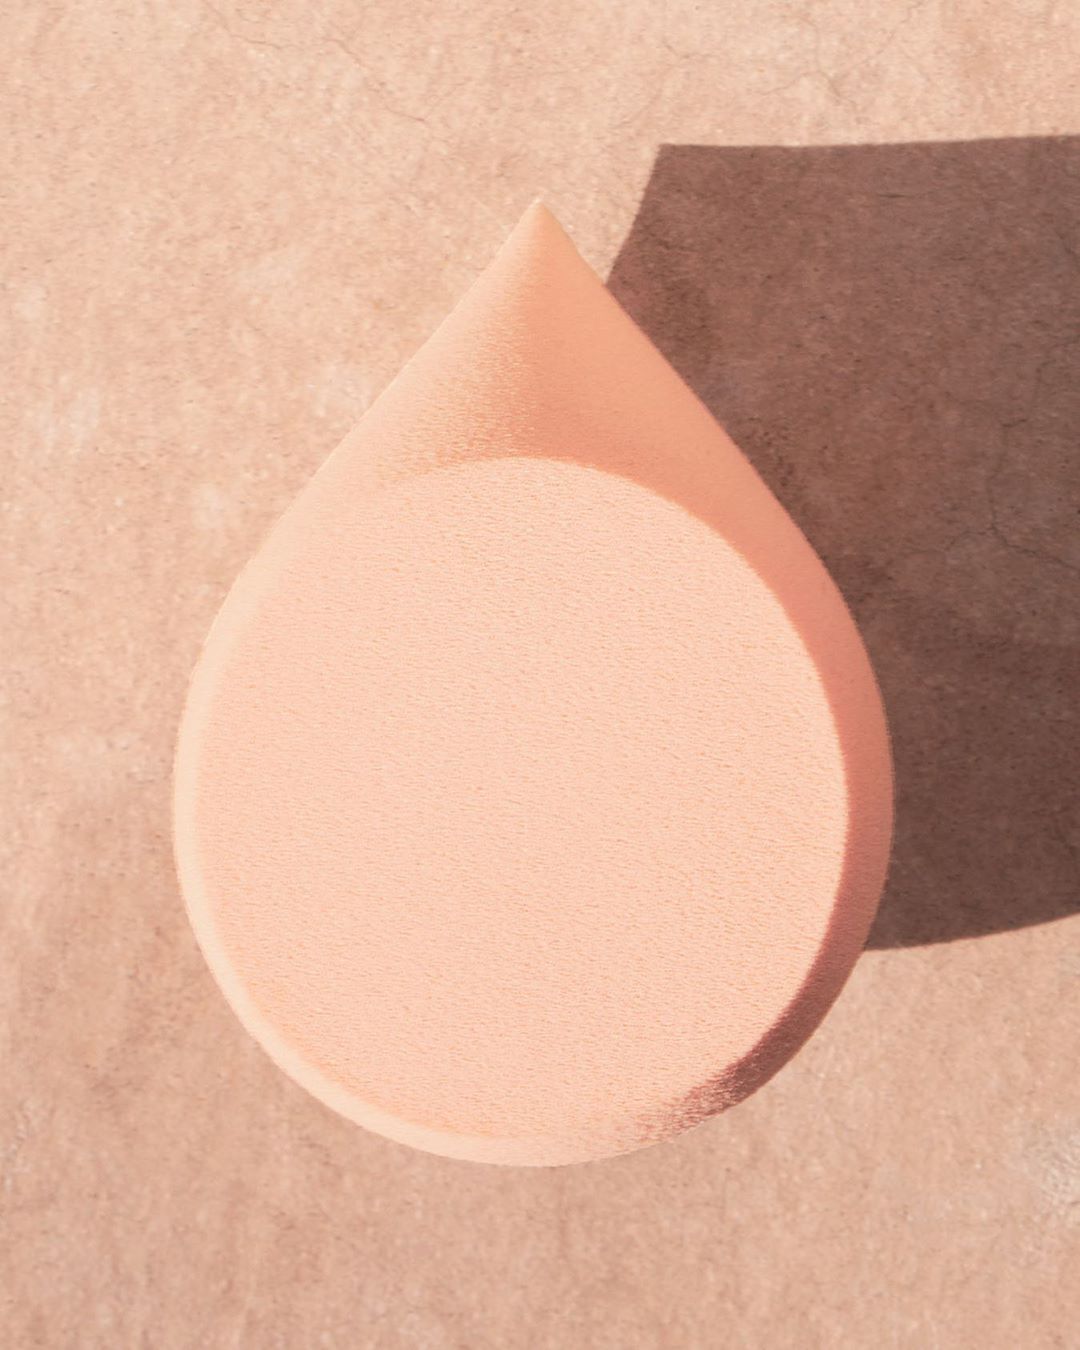 DOSE of COLORS - OUR SCULPT & SHAPE SEAMLESS BEAUTY SPONGE FEATURES A SLANTED FLAT EDGE IDEAL FOR SCULPTING, A ROUND TEAR SHAPE DESIGNED FOR BLENDING AND A PRECISION TIP FOR HARD-TO-REACH AREAS.
#dose...